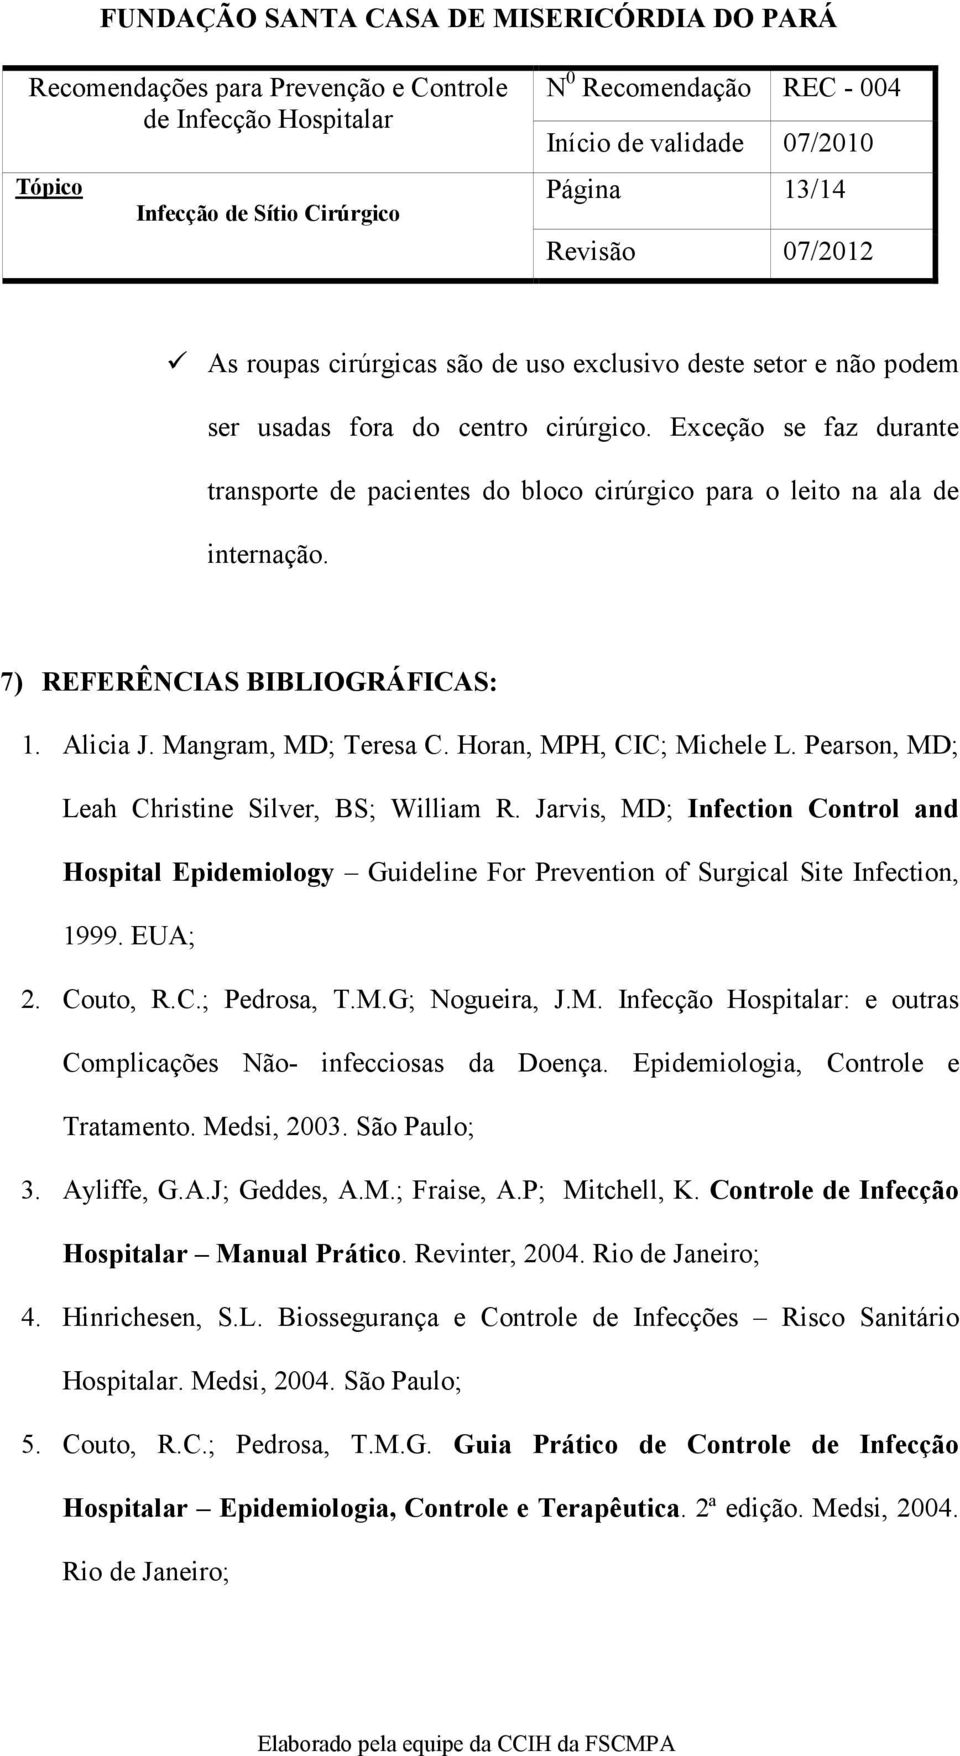 Pearson, MD; Leah Christine Silver, BS; William R. Jarvis, MD; Infection Control and Hospital Epidemiology Guideline For Prevention of Surgical Site Infection, 1999. EUA; 2. Couto, R.C.; Pedrosa, T.M.G; Nogueira, J.